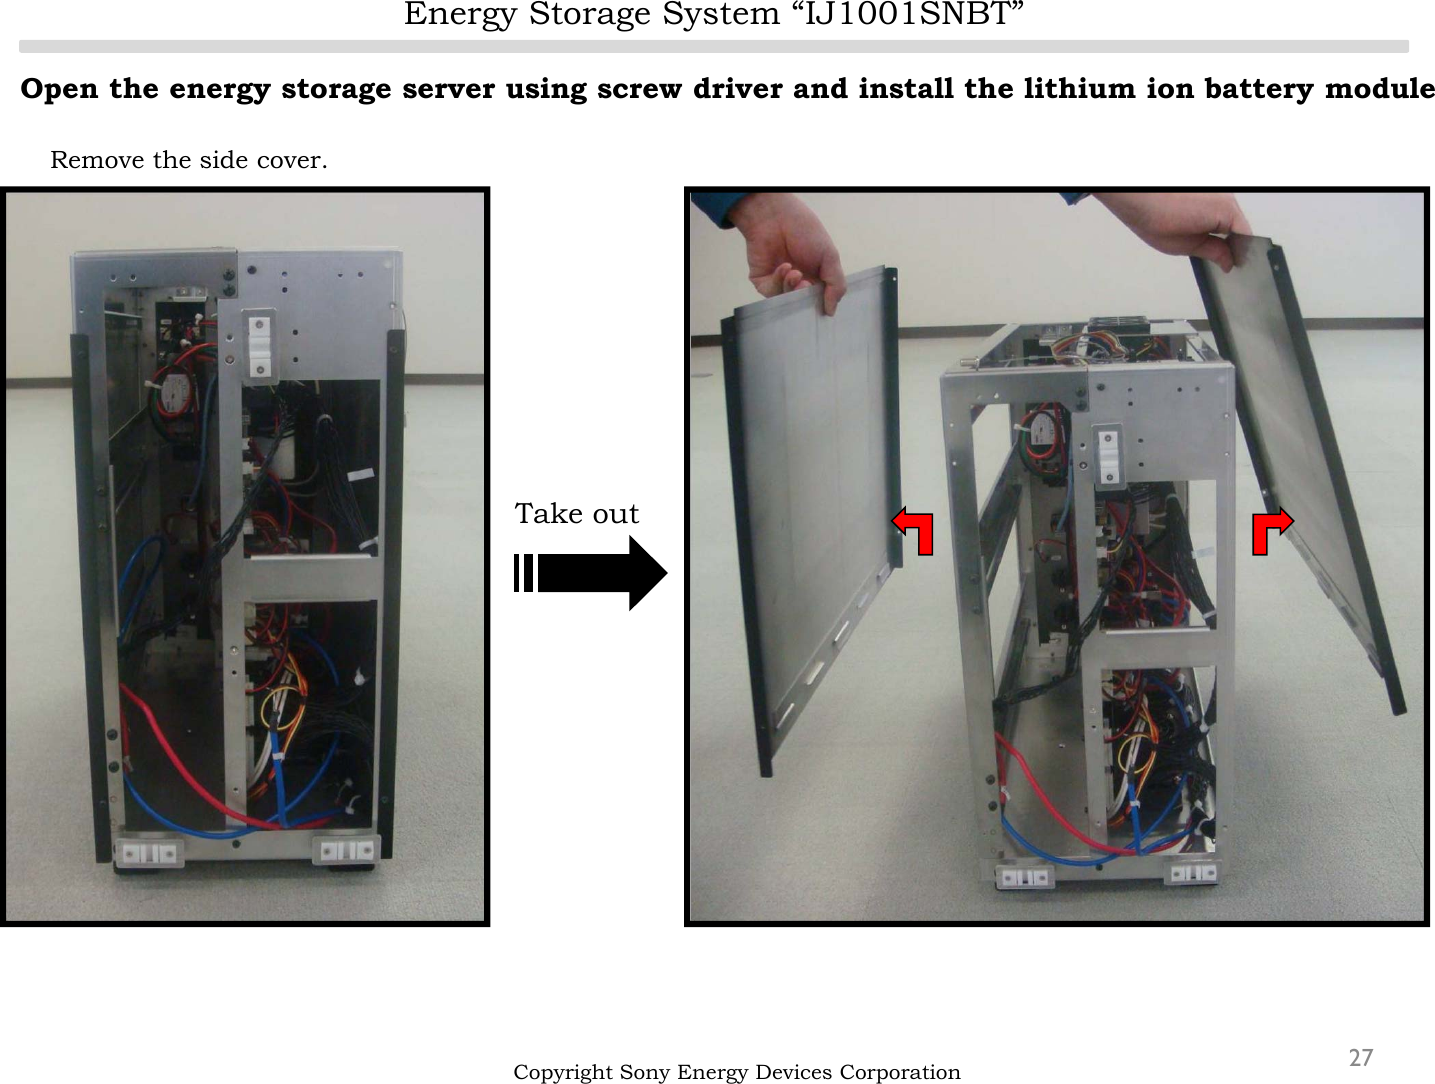 Energy Storage System “IJ1001SNBT”27Open the energy storage server using screw driver and install the lithium ion battery moduleRemove the side cover.Copyright Sony Energy Devices CorporationTake out